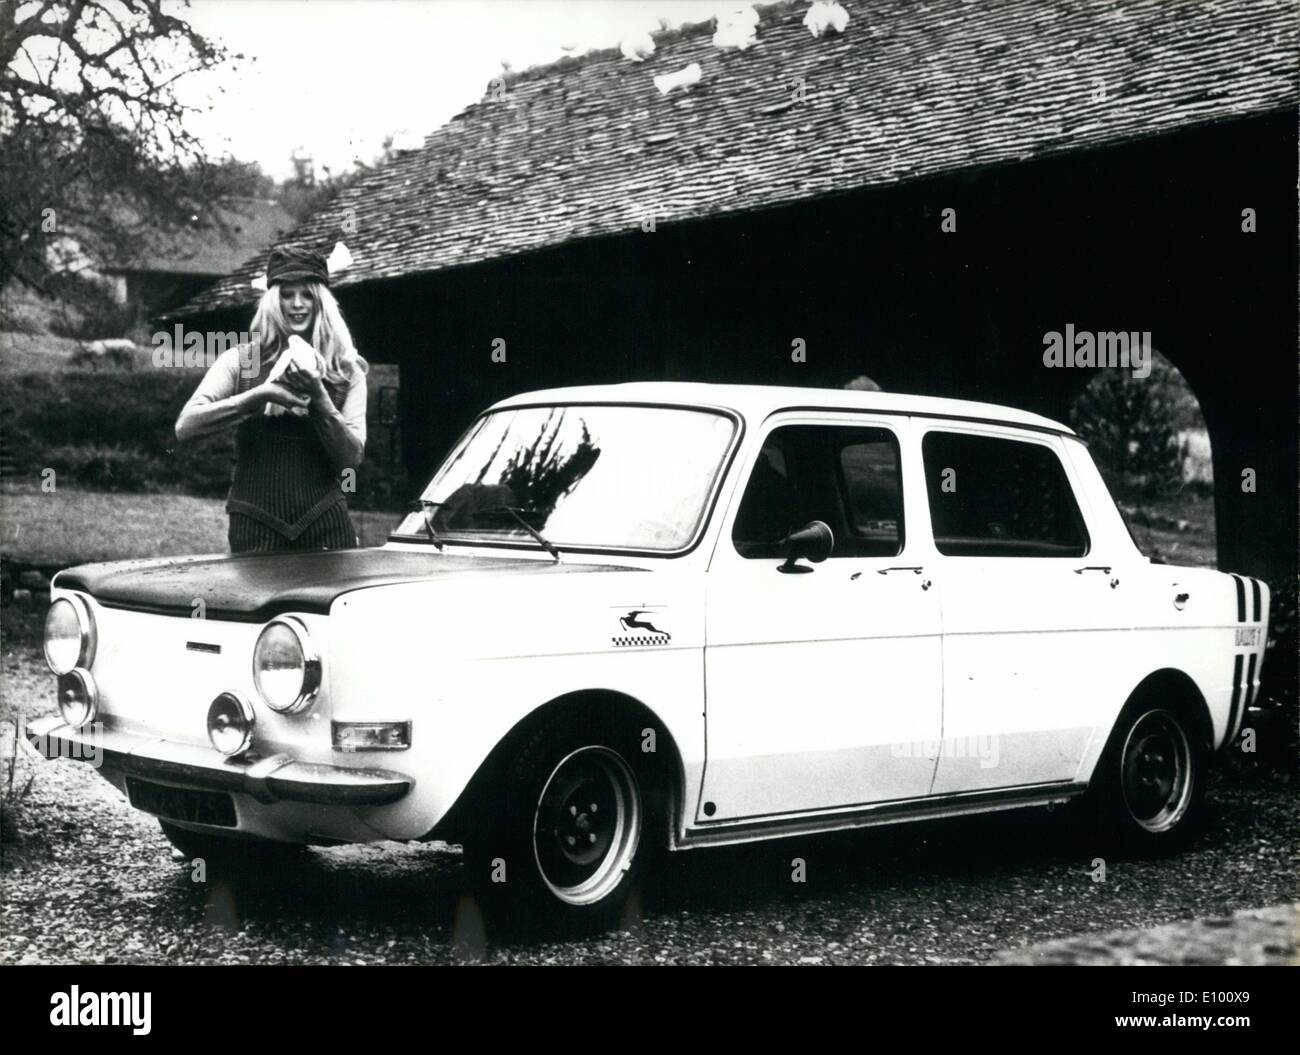 Feb. 02, 1972 - Chrysler France just launched a new car for sports and for everyday use called a Simca 1000: Rallye 1. The car can go up to 155 kilometers per hour and it's engine is a little bit more powerful than the previous model. Mrs. Moktar Ould Daddah With Nurser Stock Photo